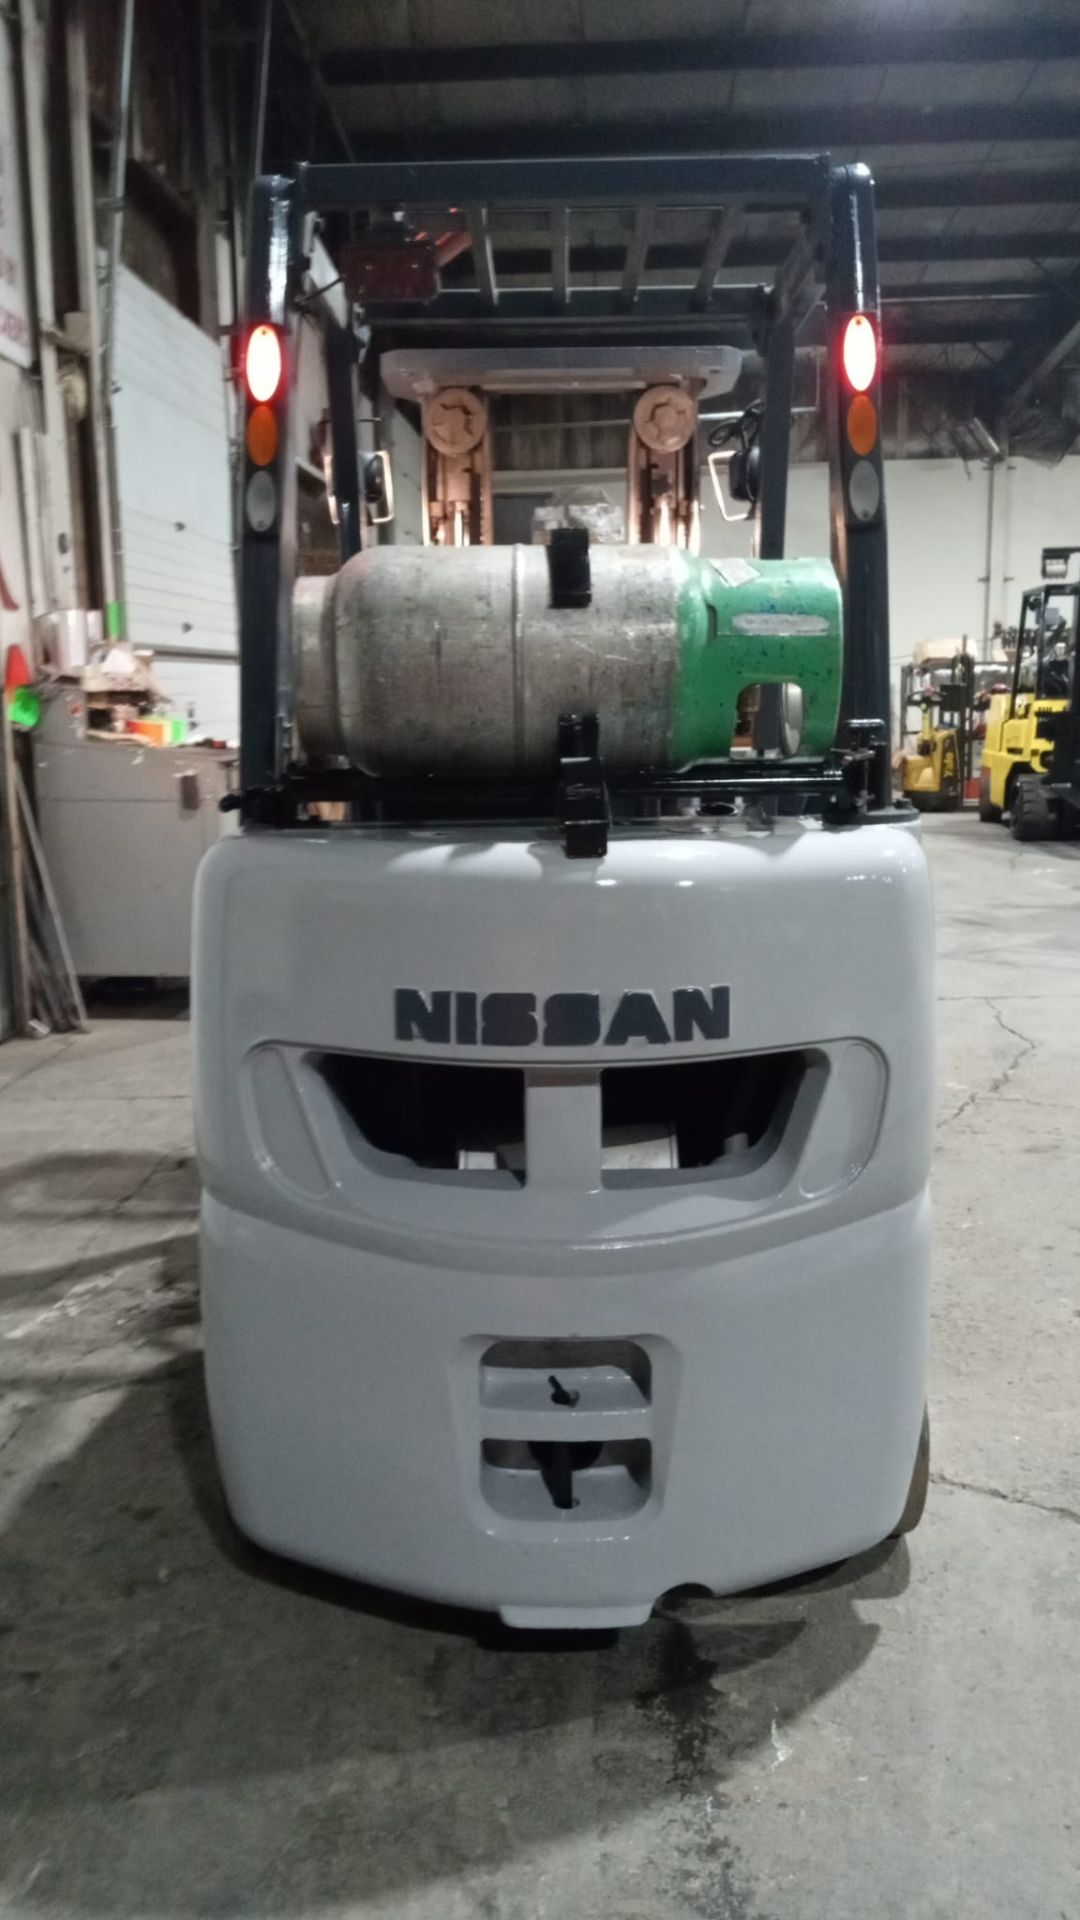 Nissan 5,000 Capacity Forklift LPG (Propane) with Sideshift and 3-STAGE MAST non-marking tires (no - Image 6 of 6